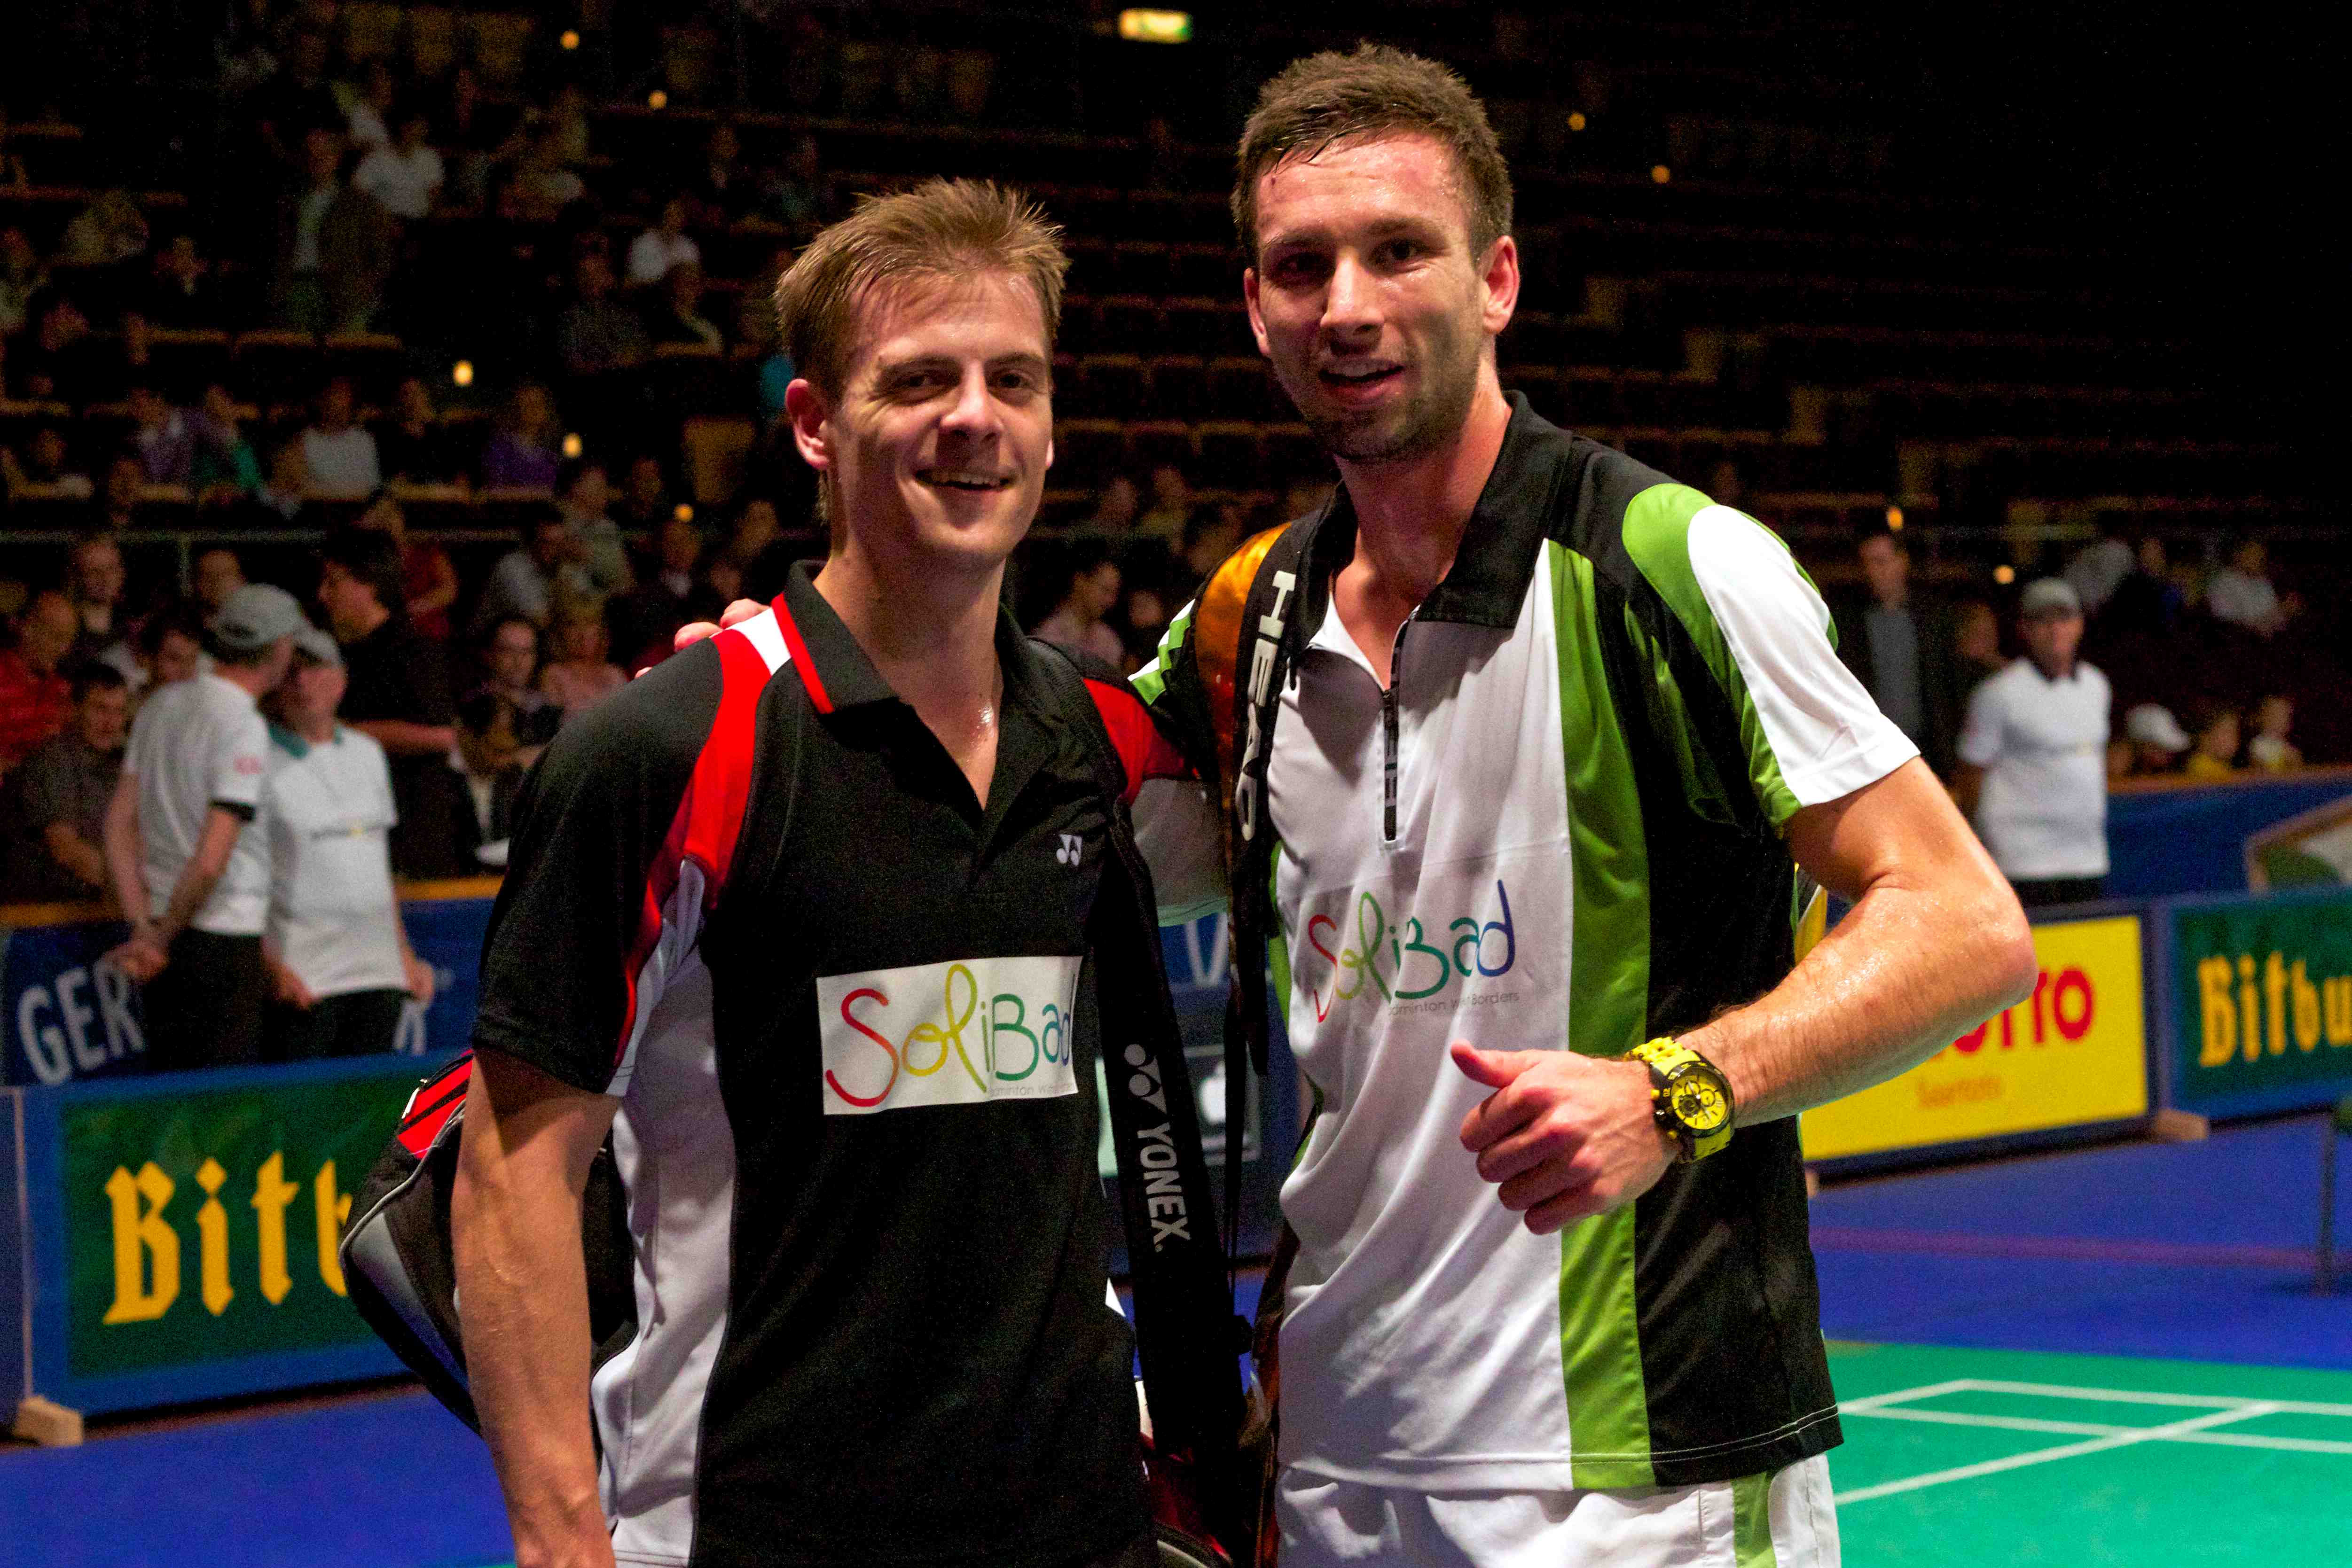 Denmark’s Hans Kristian Vittinghus will try to clinch his first major title when he takes on Chen Long from China in Sunday’s final of the Bitburger Open.  He beat Petr […]